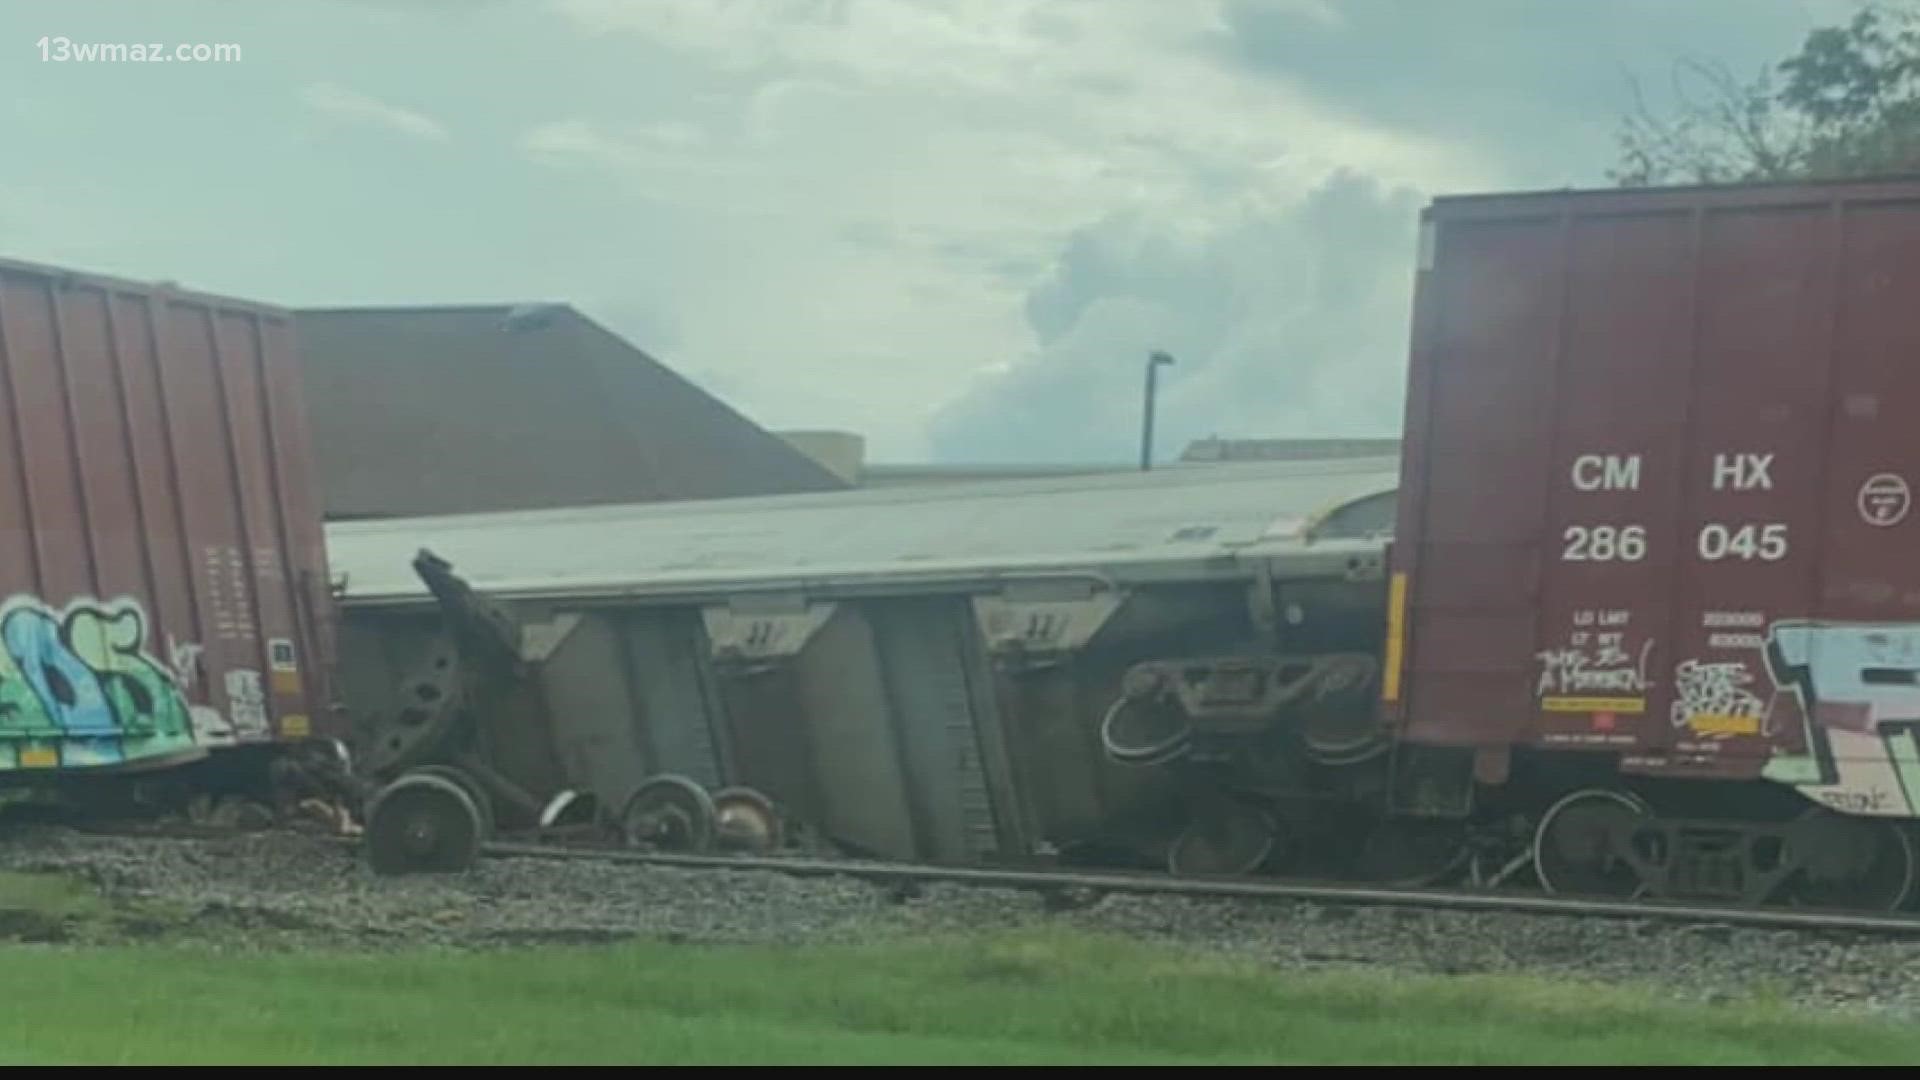 20 train cars derailed just after 5 p.m. near Watson Boulevard and Highway 247.